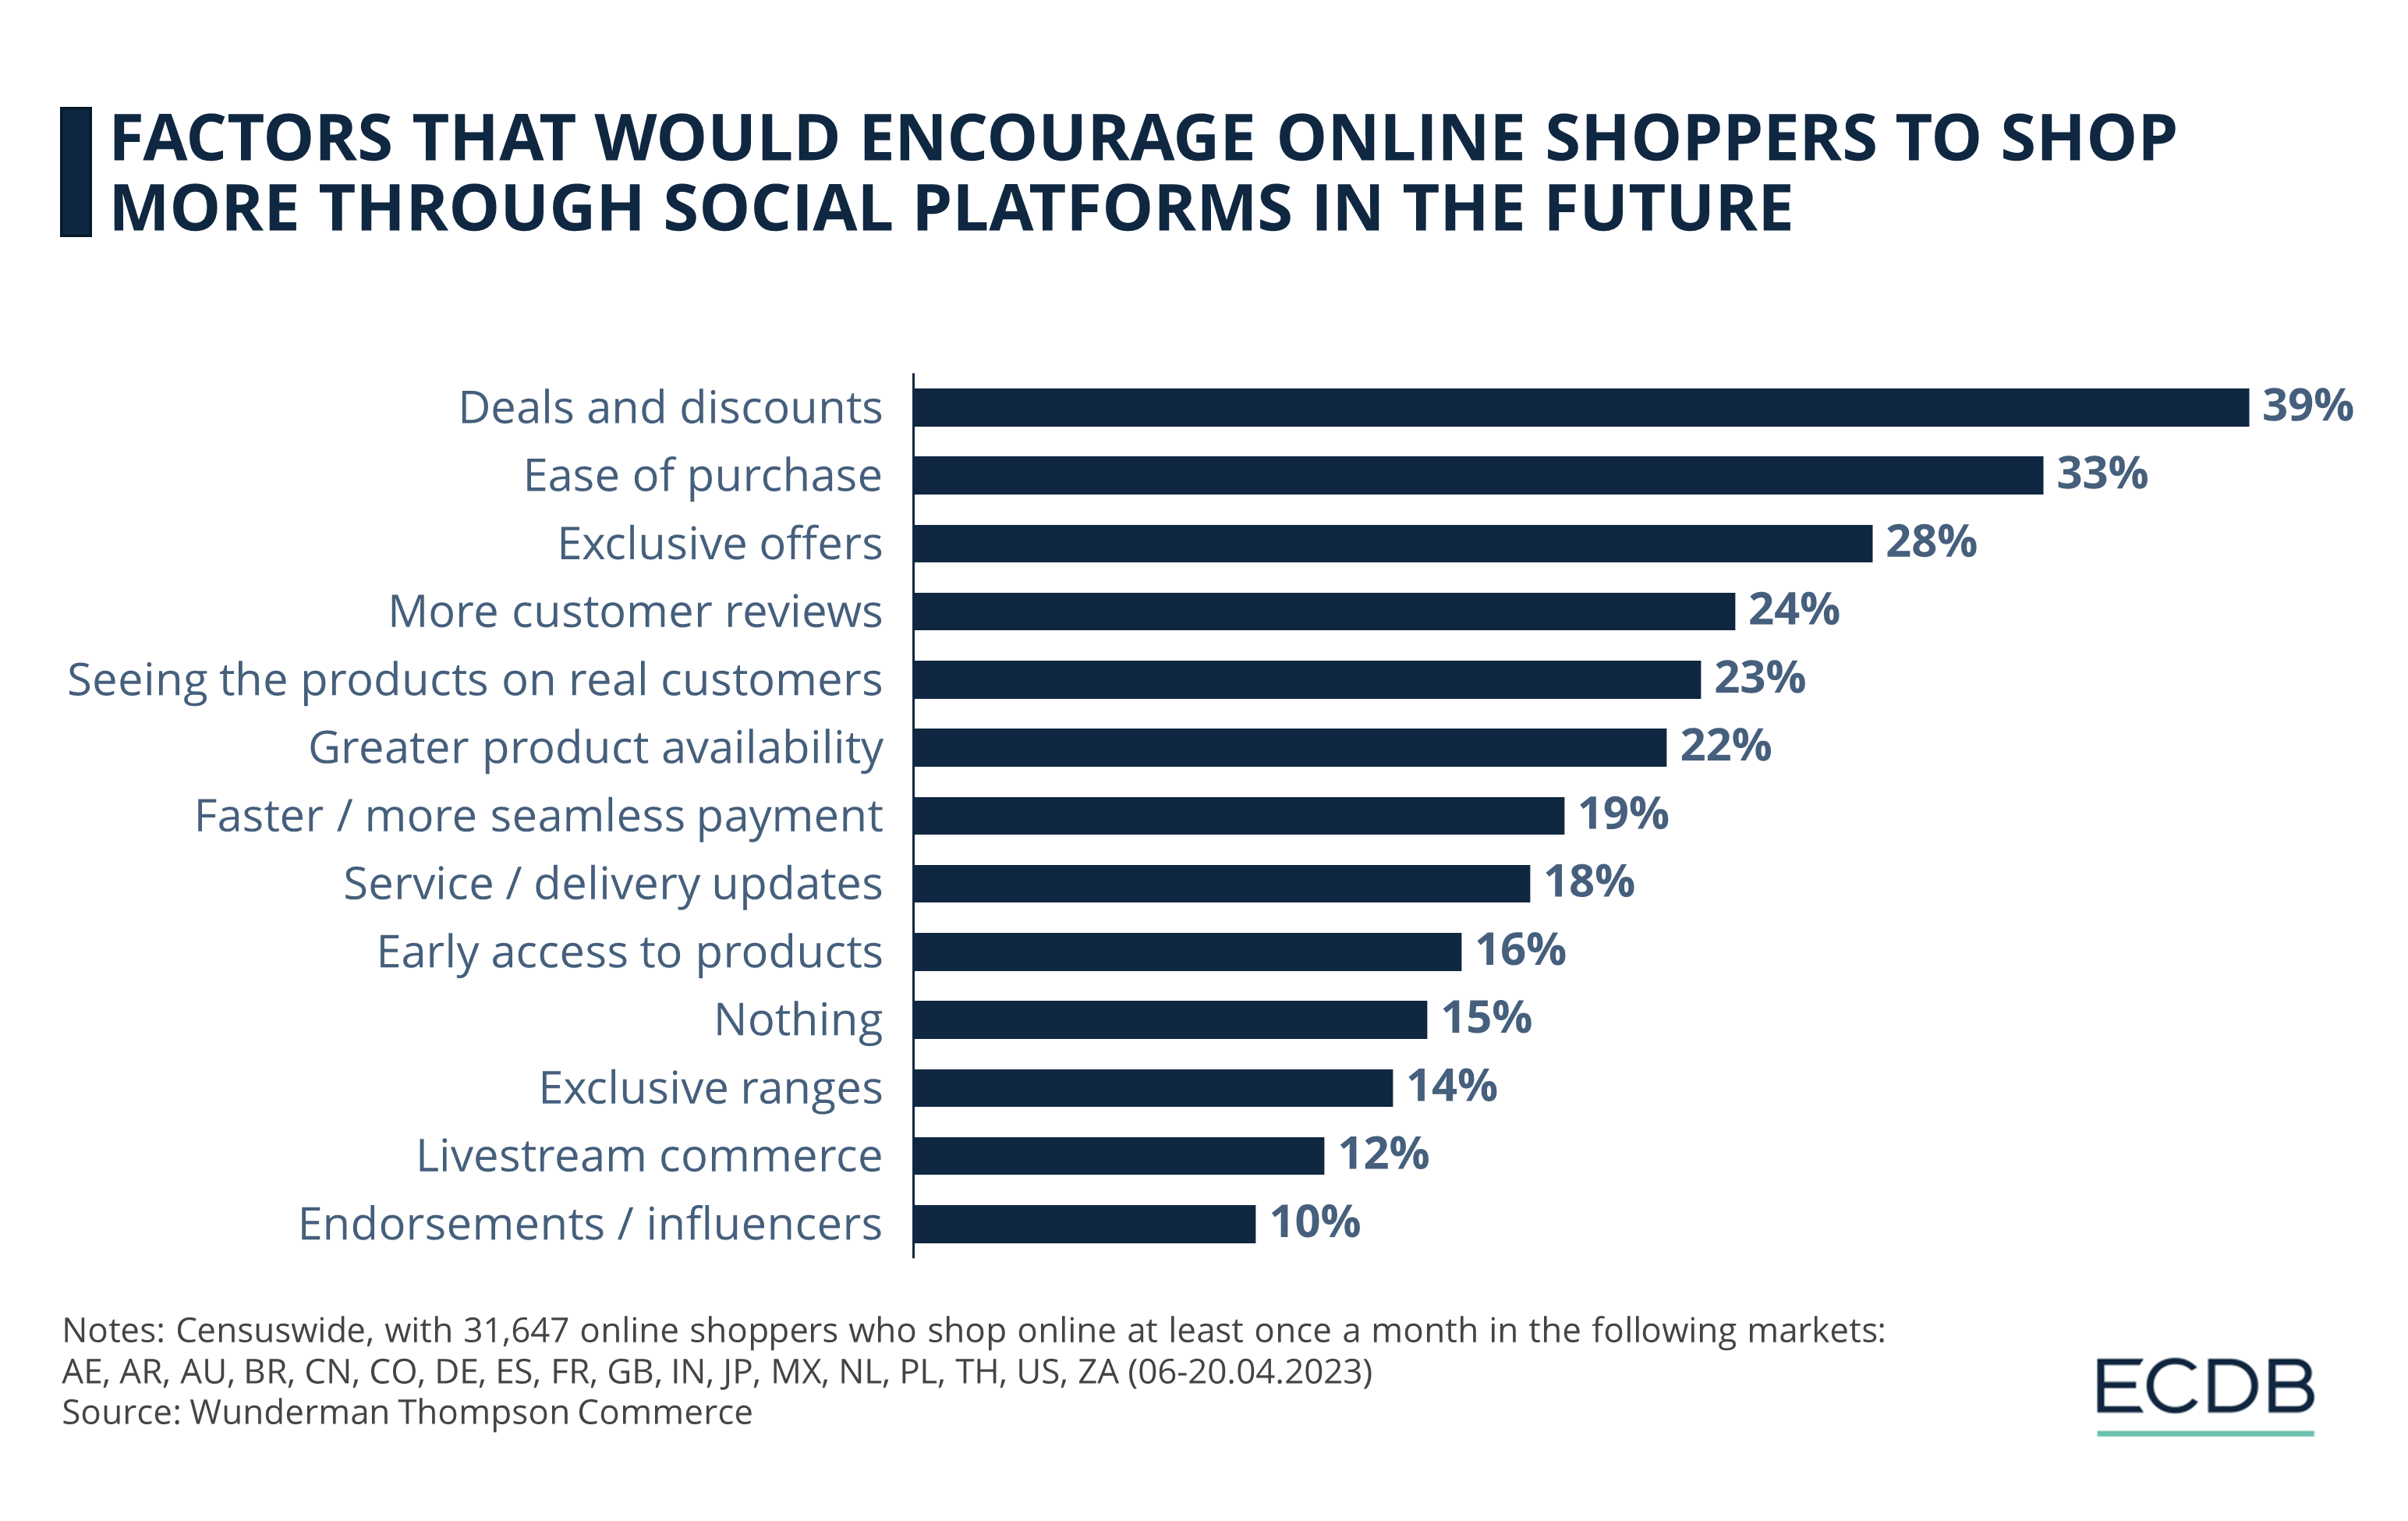 Factors That Would Encourage Online Shoppers to Shop More Through Social Platforms in the Future